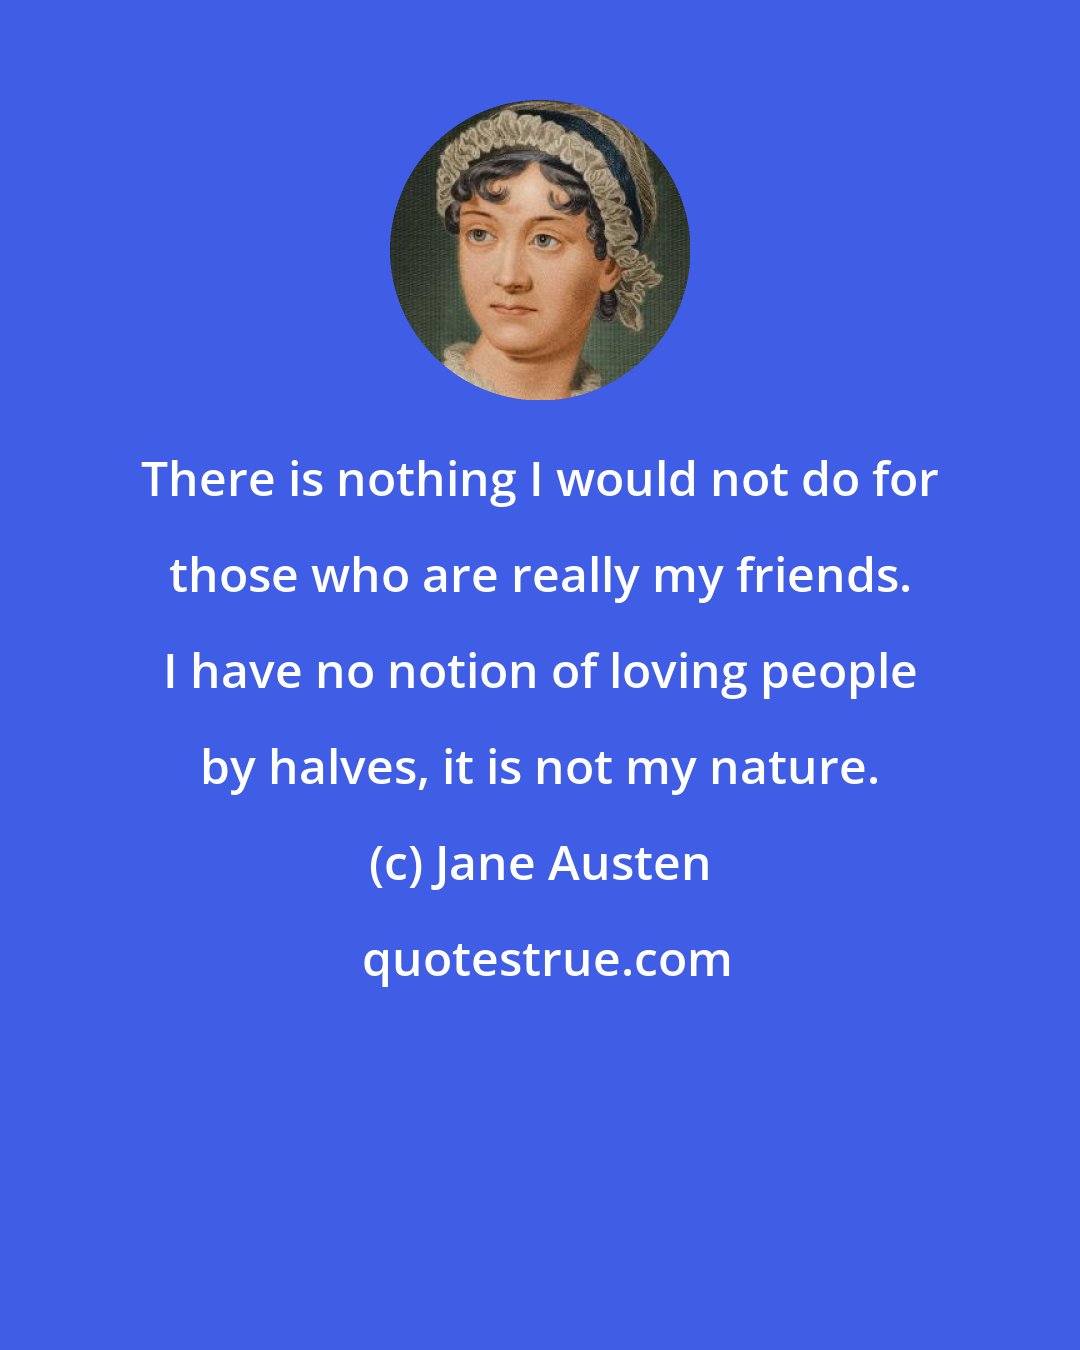 Jane Austen: There is nothing I would not do for those who are really my friends. I have no notion of loving people by halves, it is not my nature.